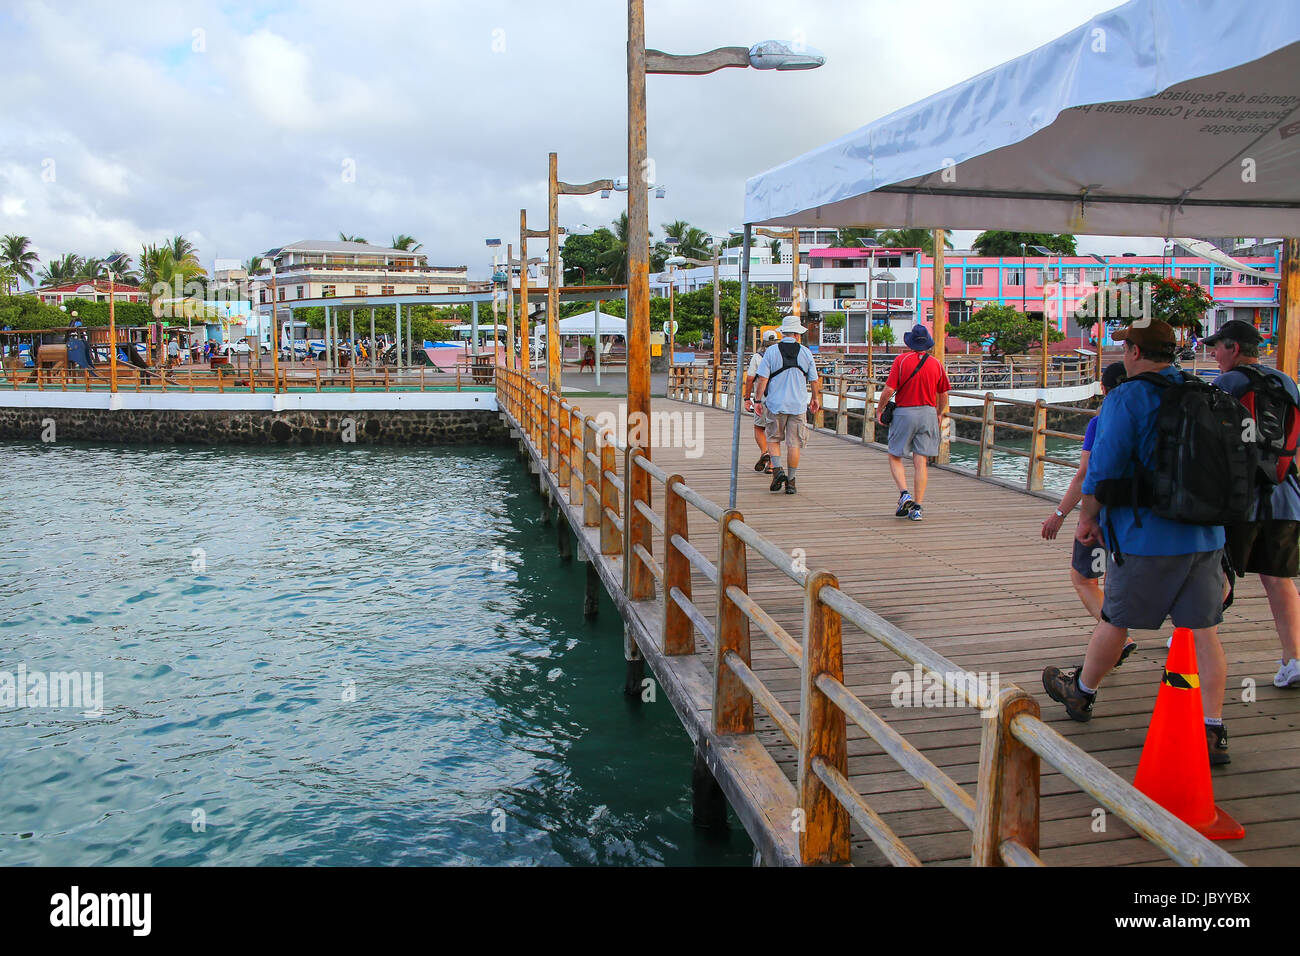 People walking on the pier at Puerto Ayora on Santa Cruz Island, Galapagos National Park, Ecuador. Puerto Ayora is the most populous town in the Galap Stock Photo